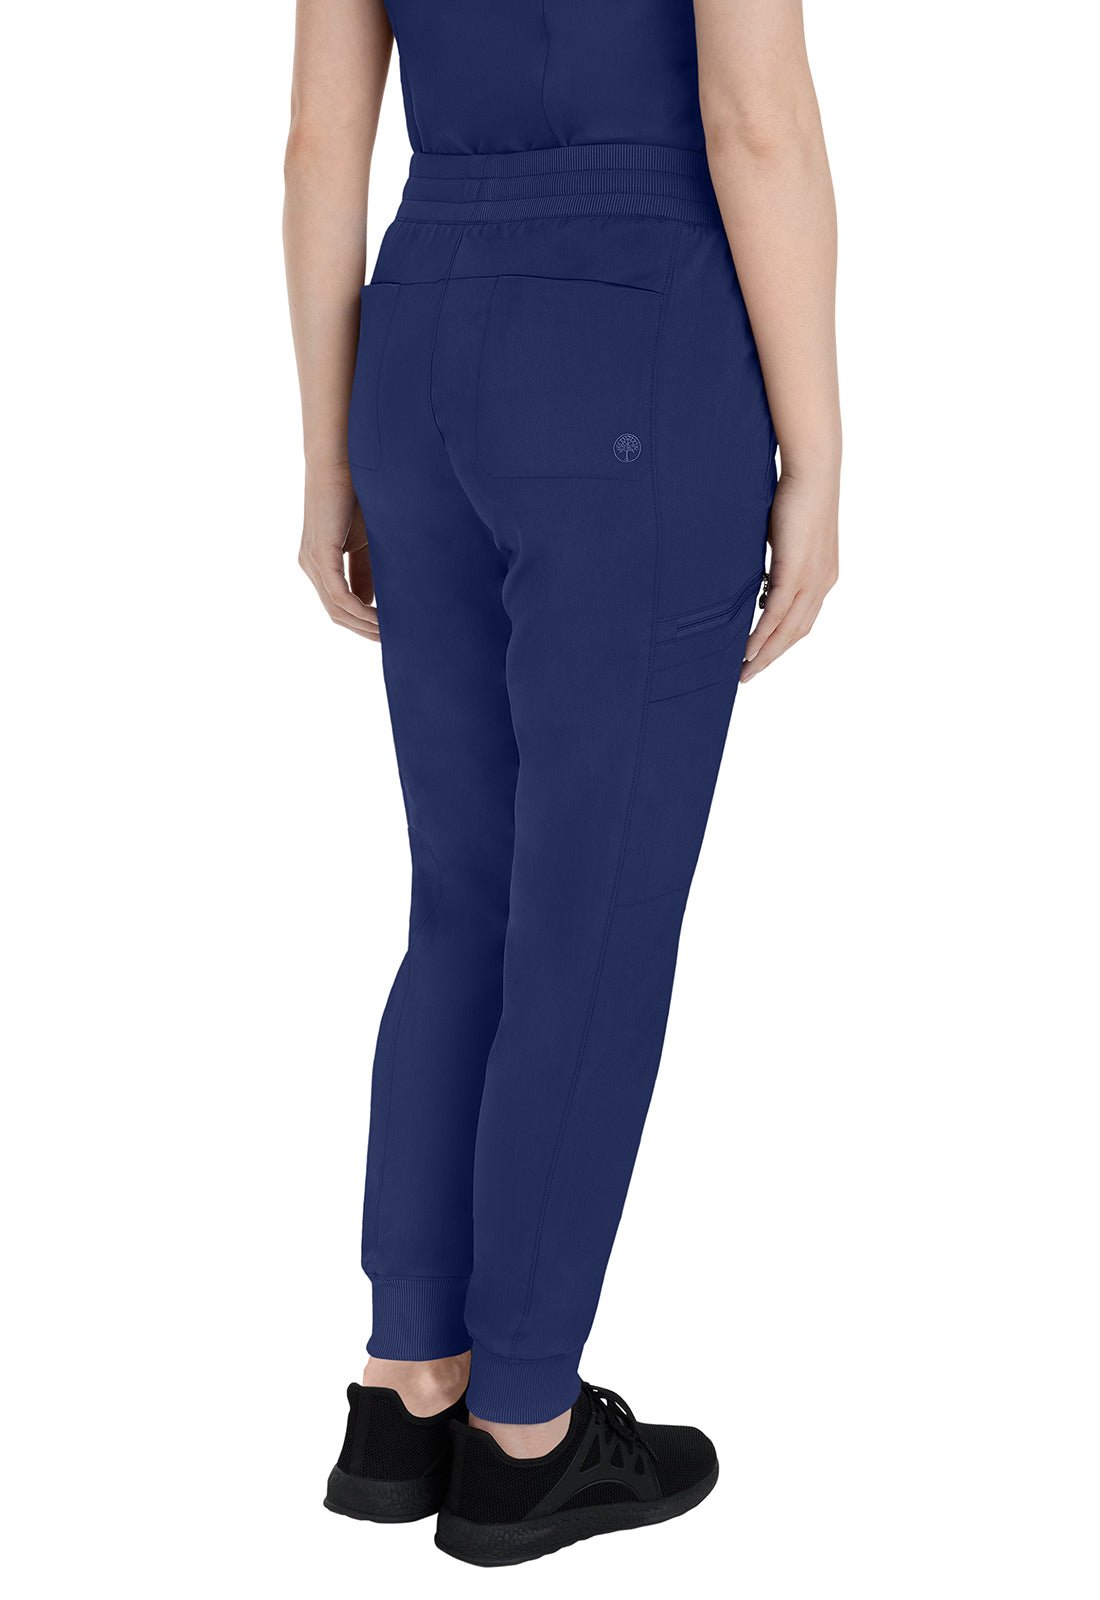 Healing Hands Toby Jogger Pant 9244 in Black, Navy, Pewter, Royal - Scrubs Select